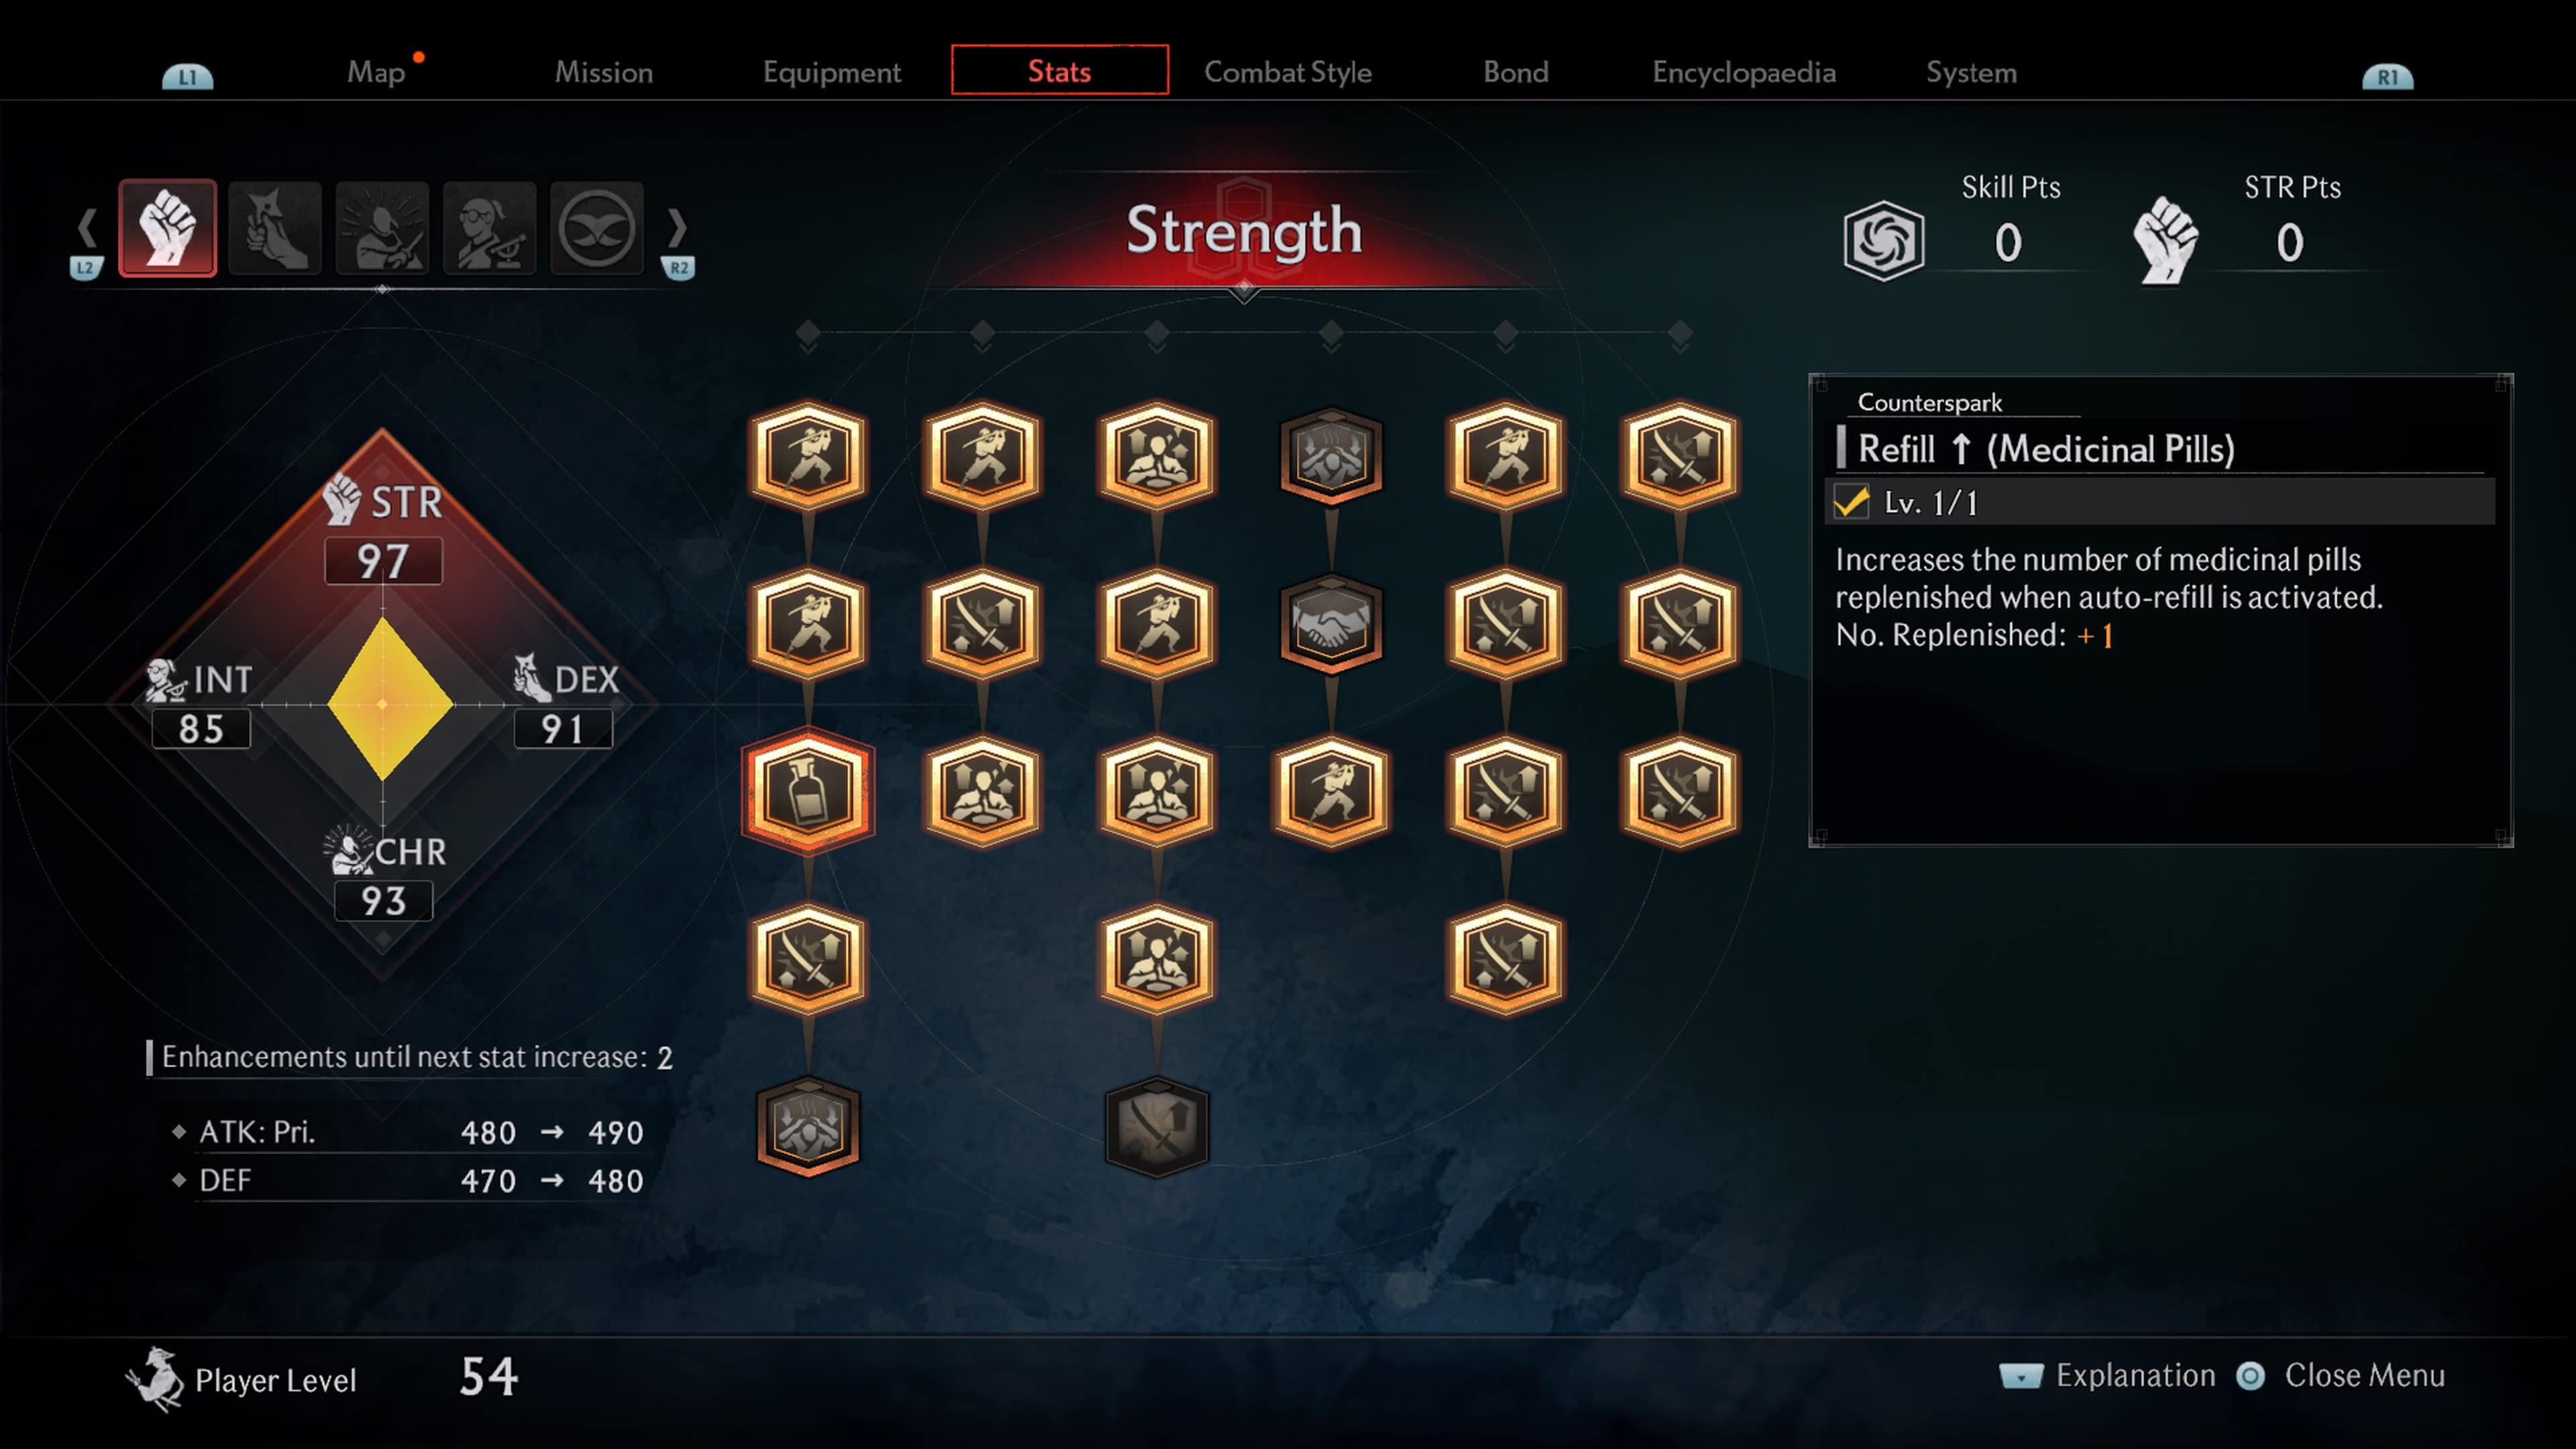 A screenshot of the video game Rise of the Ronin's skill tree user interface, highlighting a strength attribute and a specific skill called counterattack with a description for how to get more Medicinal Pills.